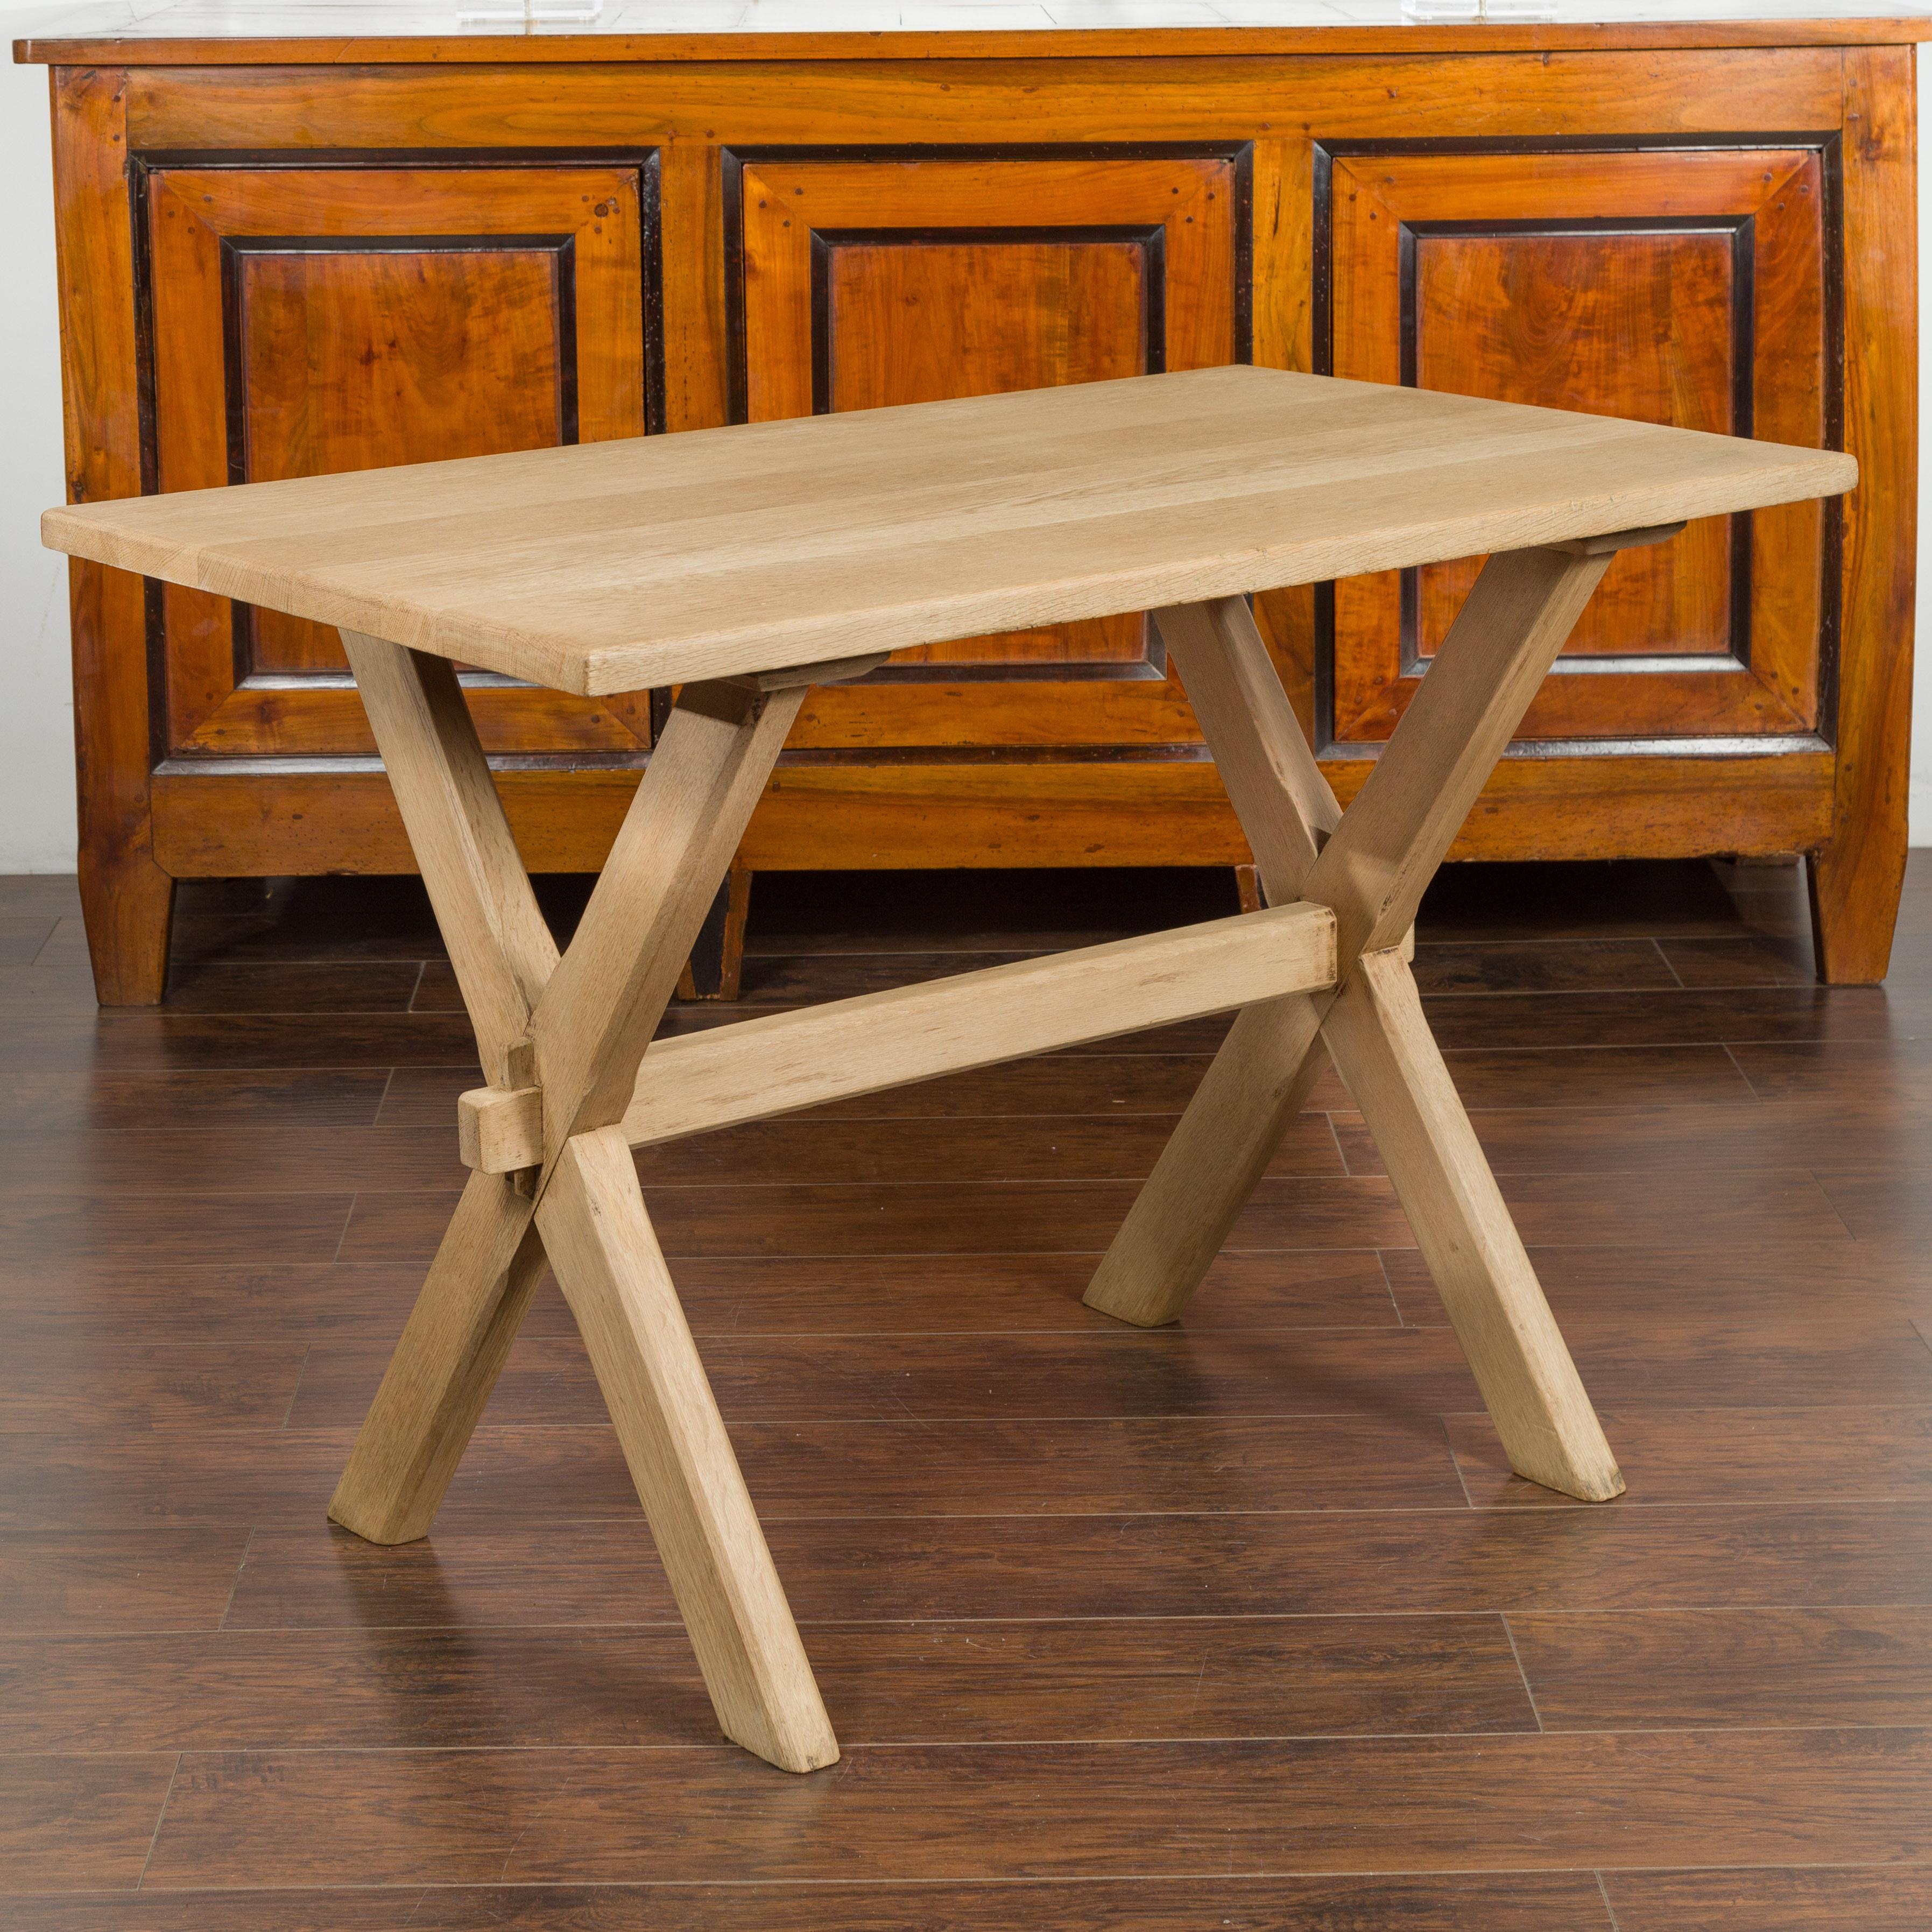 English Turn of the Century Oak Sawbuck Table with X-Form Base, circa 1900 For Sale 2